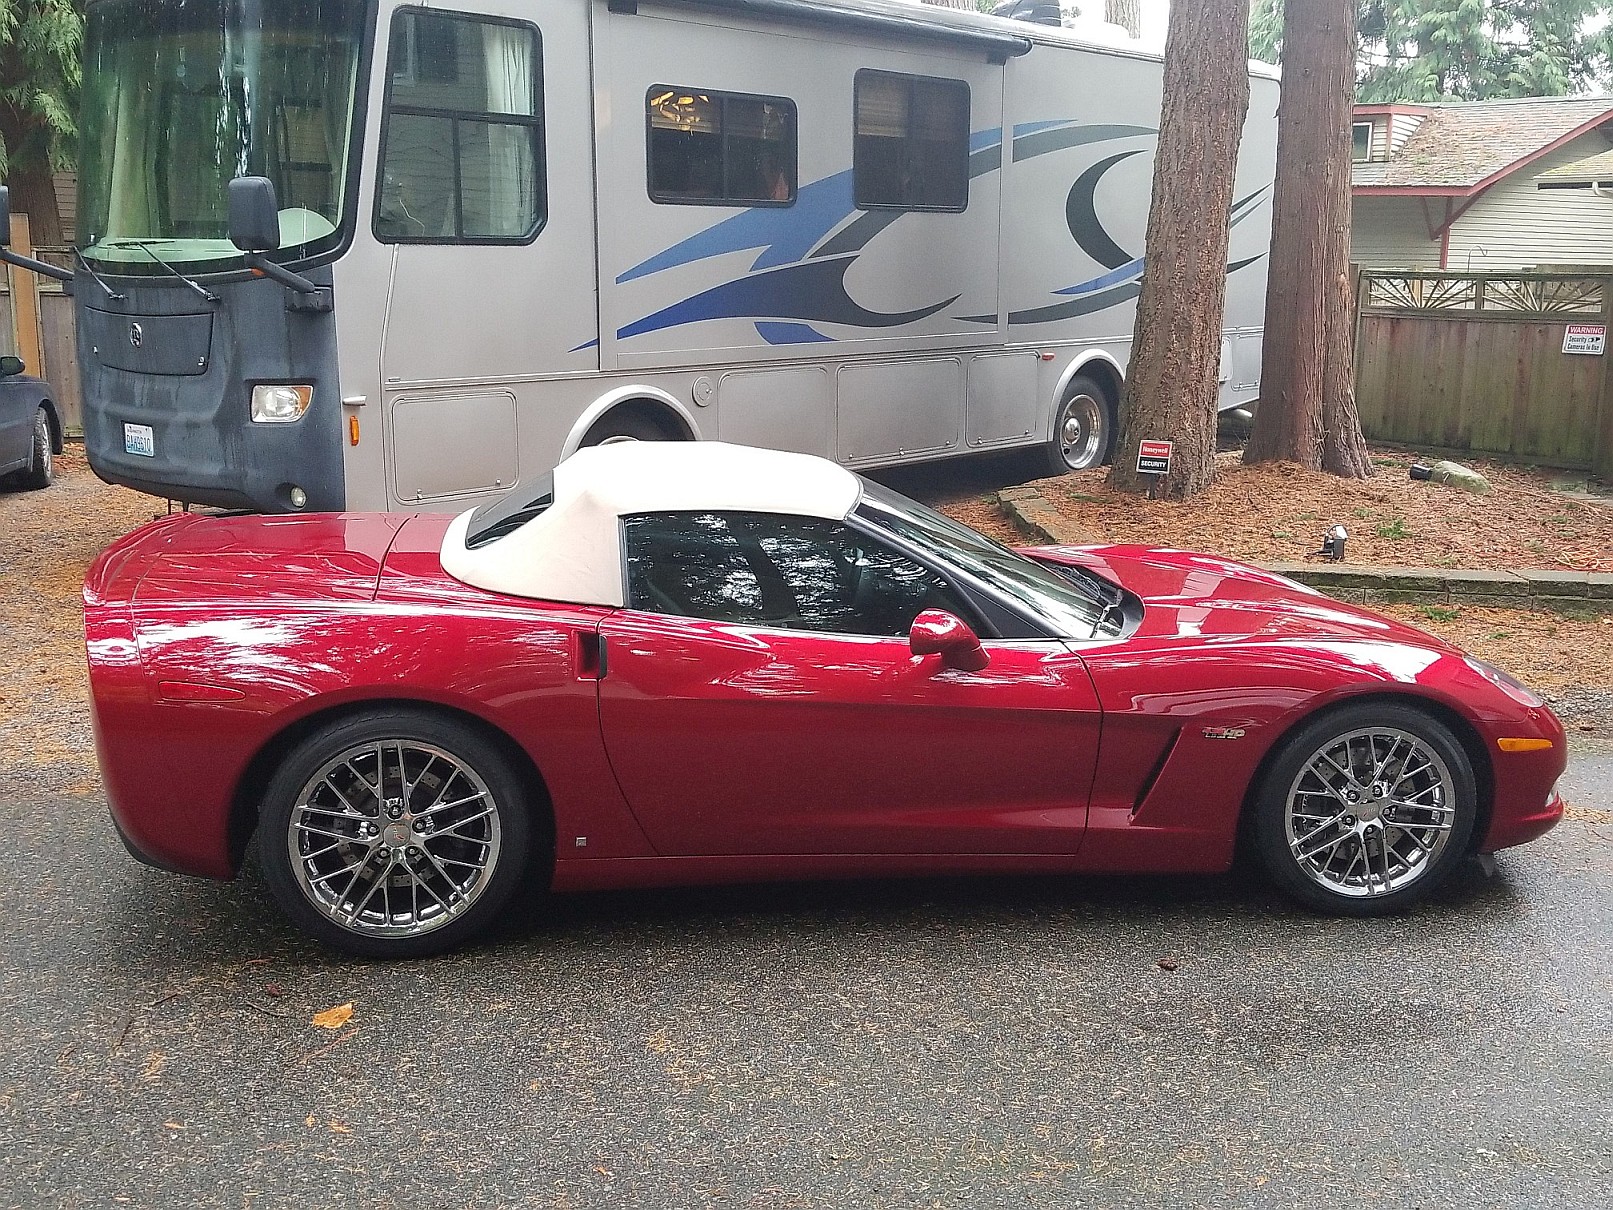 Metzger 2008 Vette Victory Red Convertible 2